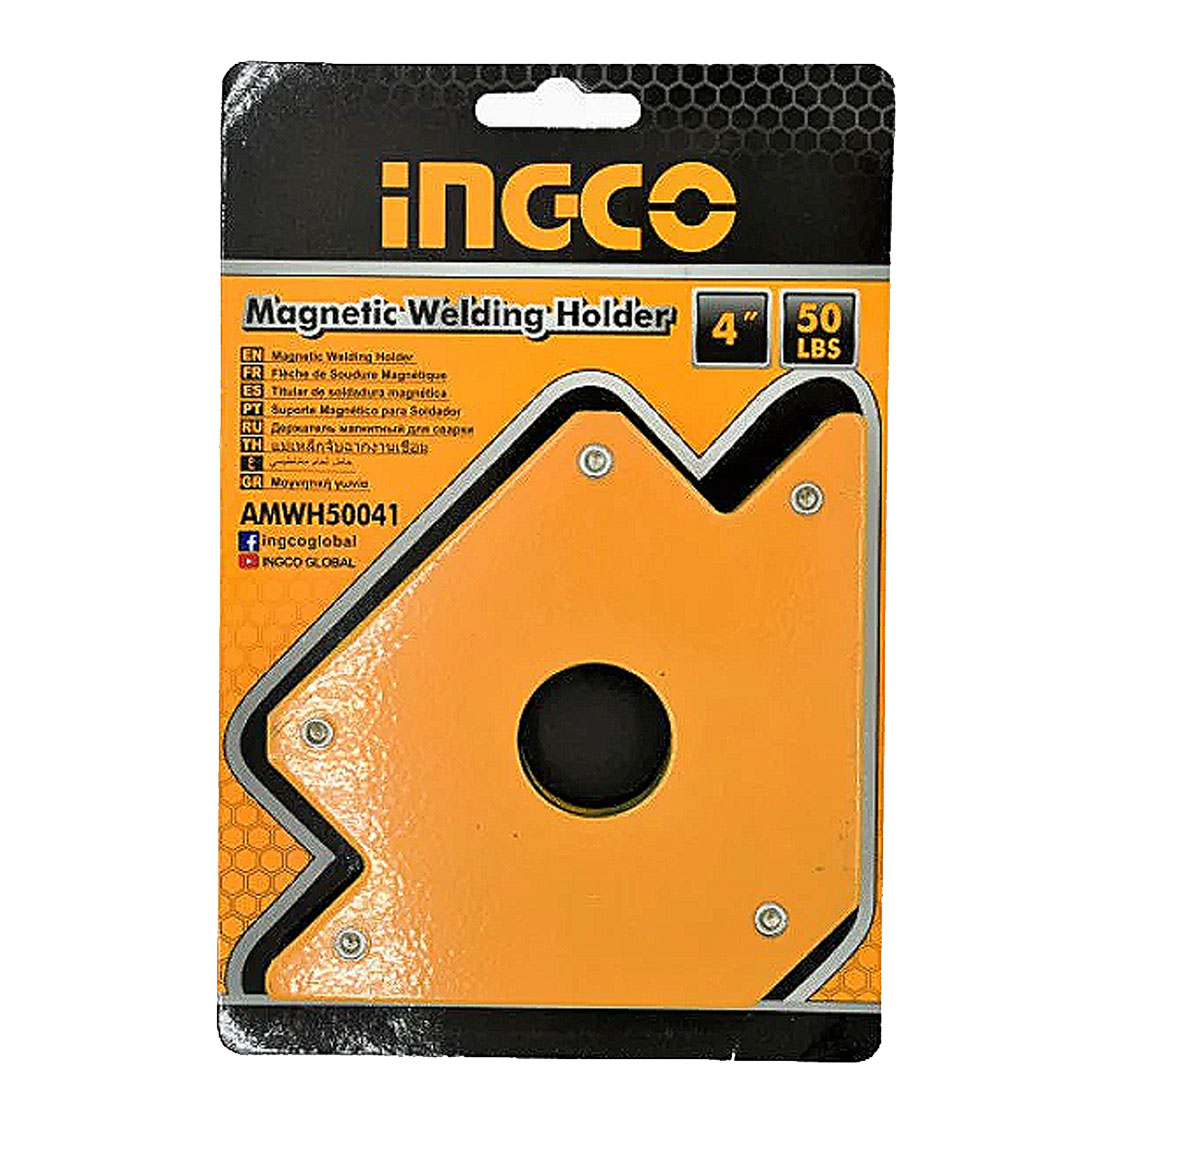 Ingco Magnetic Welding Holder 4" AMWH50041